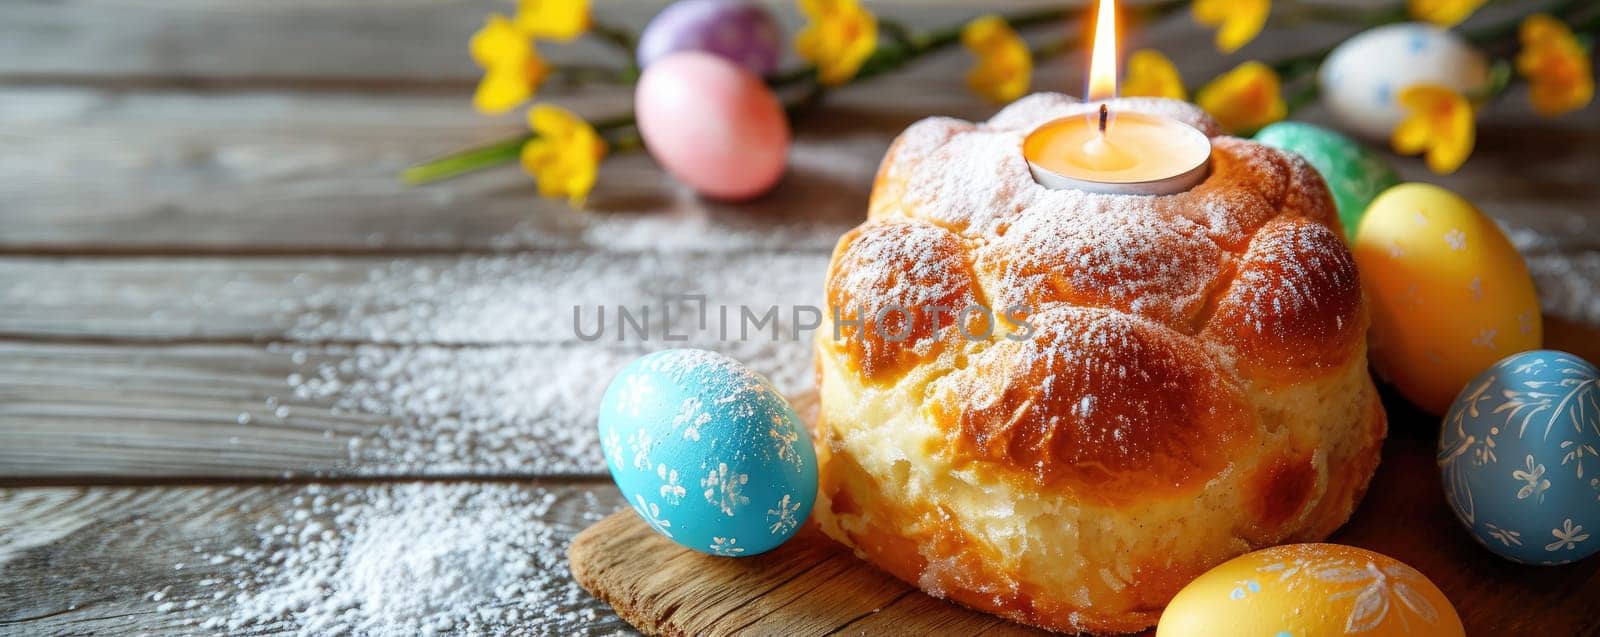 Easter cake and painted eggs on wooden background.